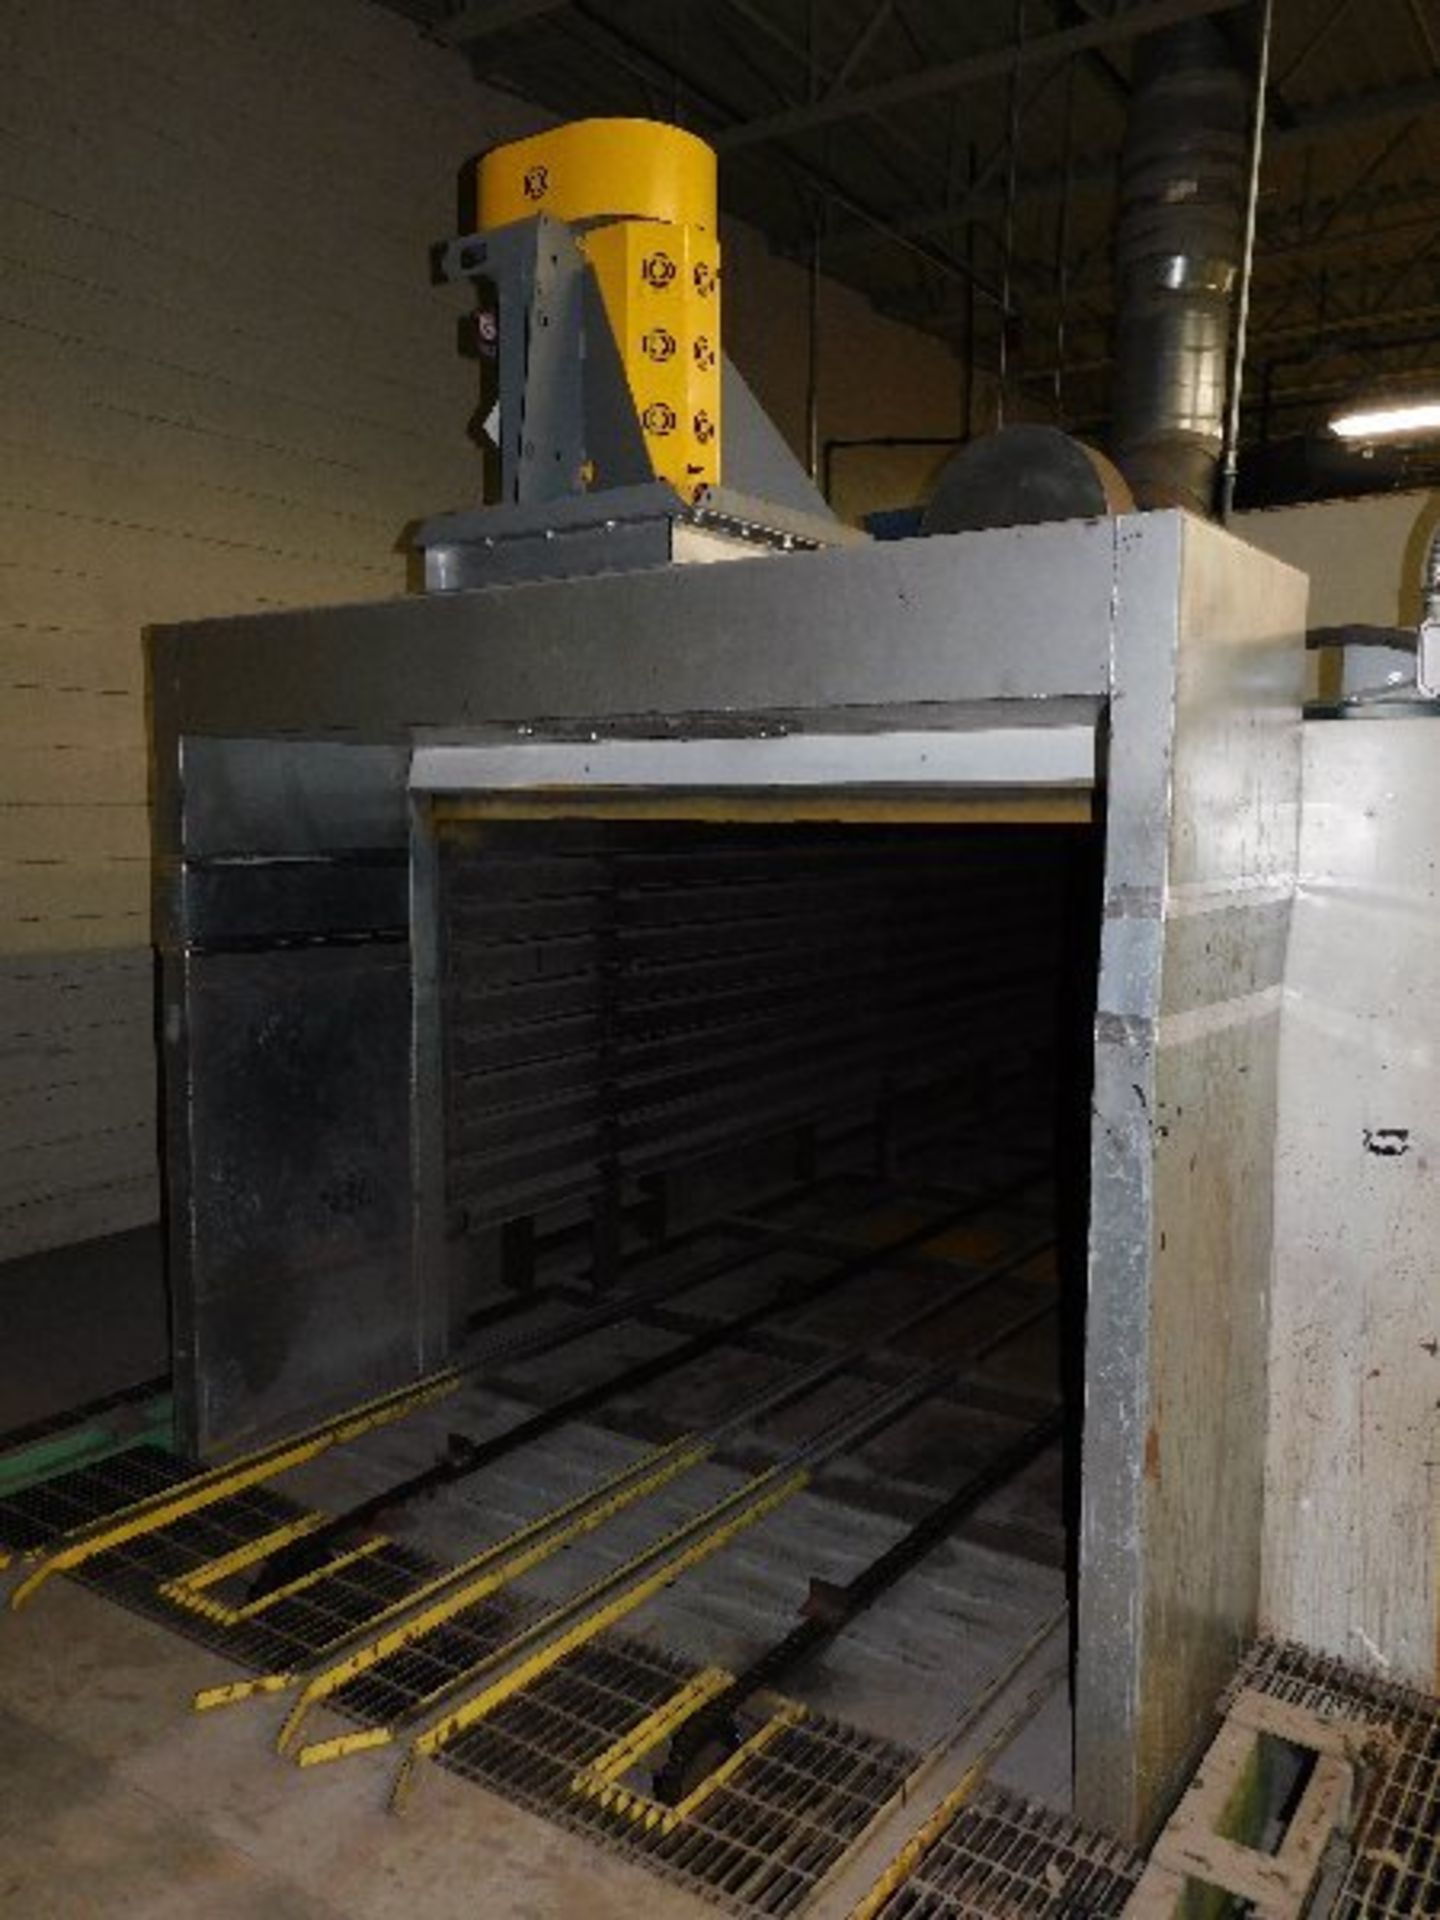 Maxon 40' Curing Oven, Dual Control, S-Fired, 6' X 5' Open, W/Chain Drive Conveyor - Image 7 of 12